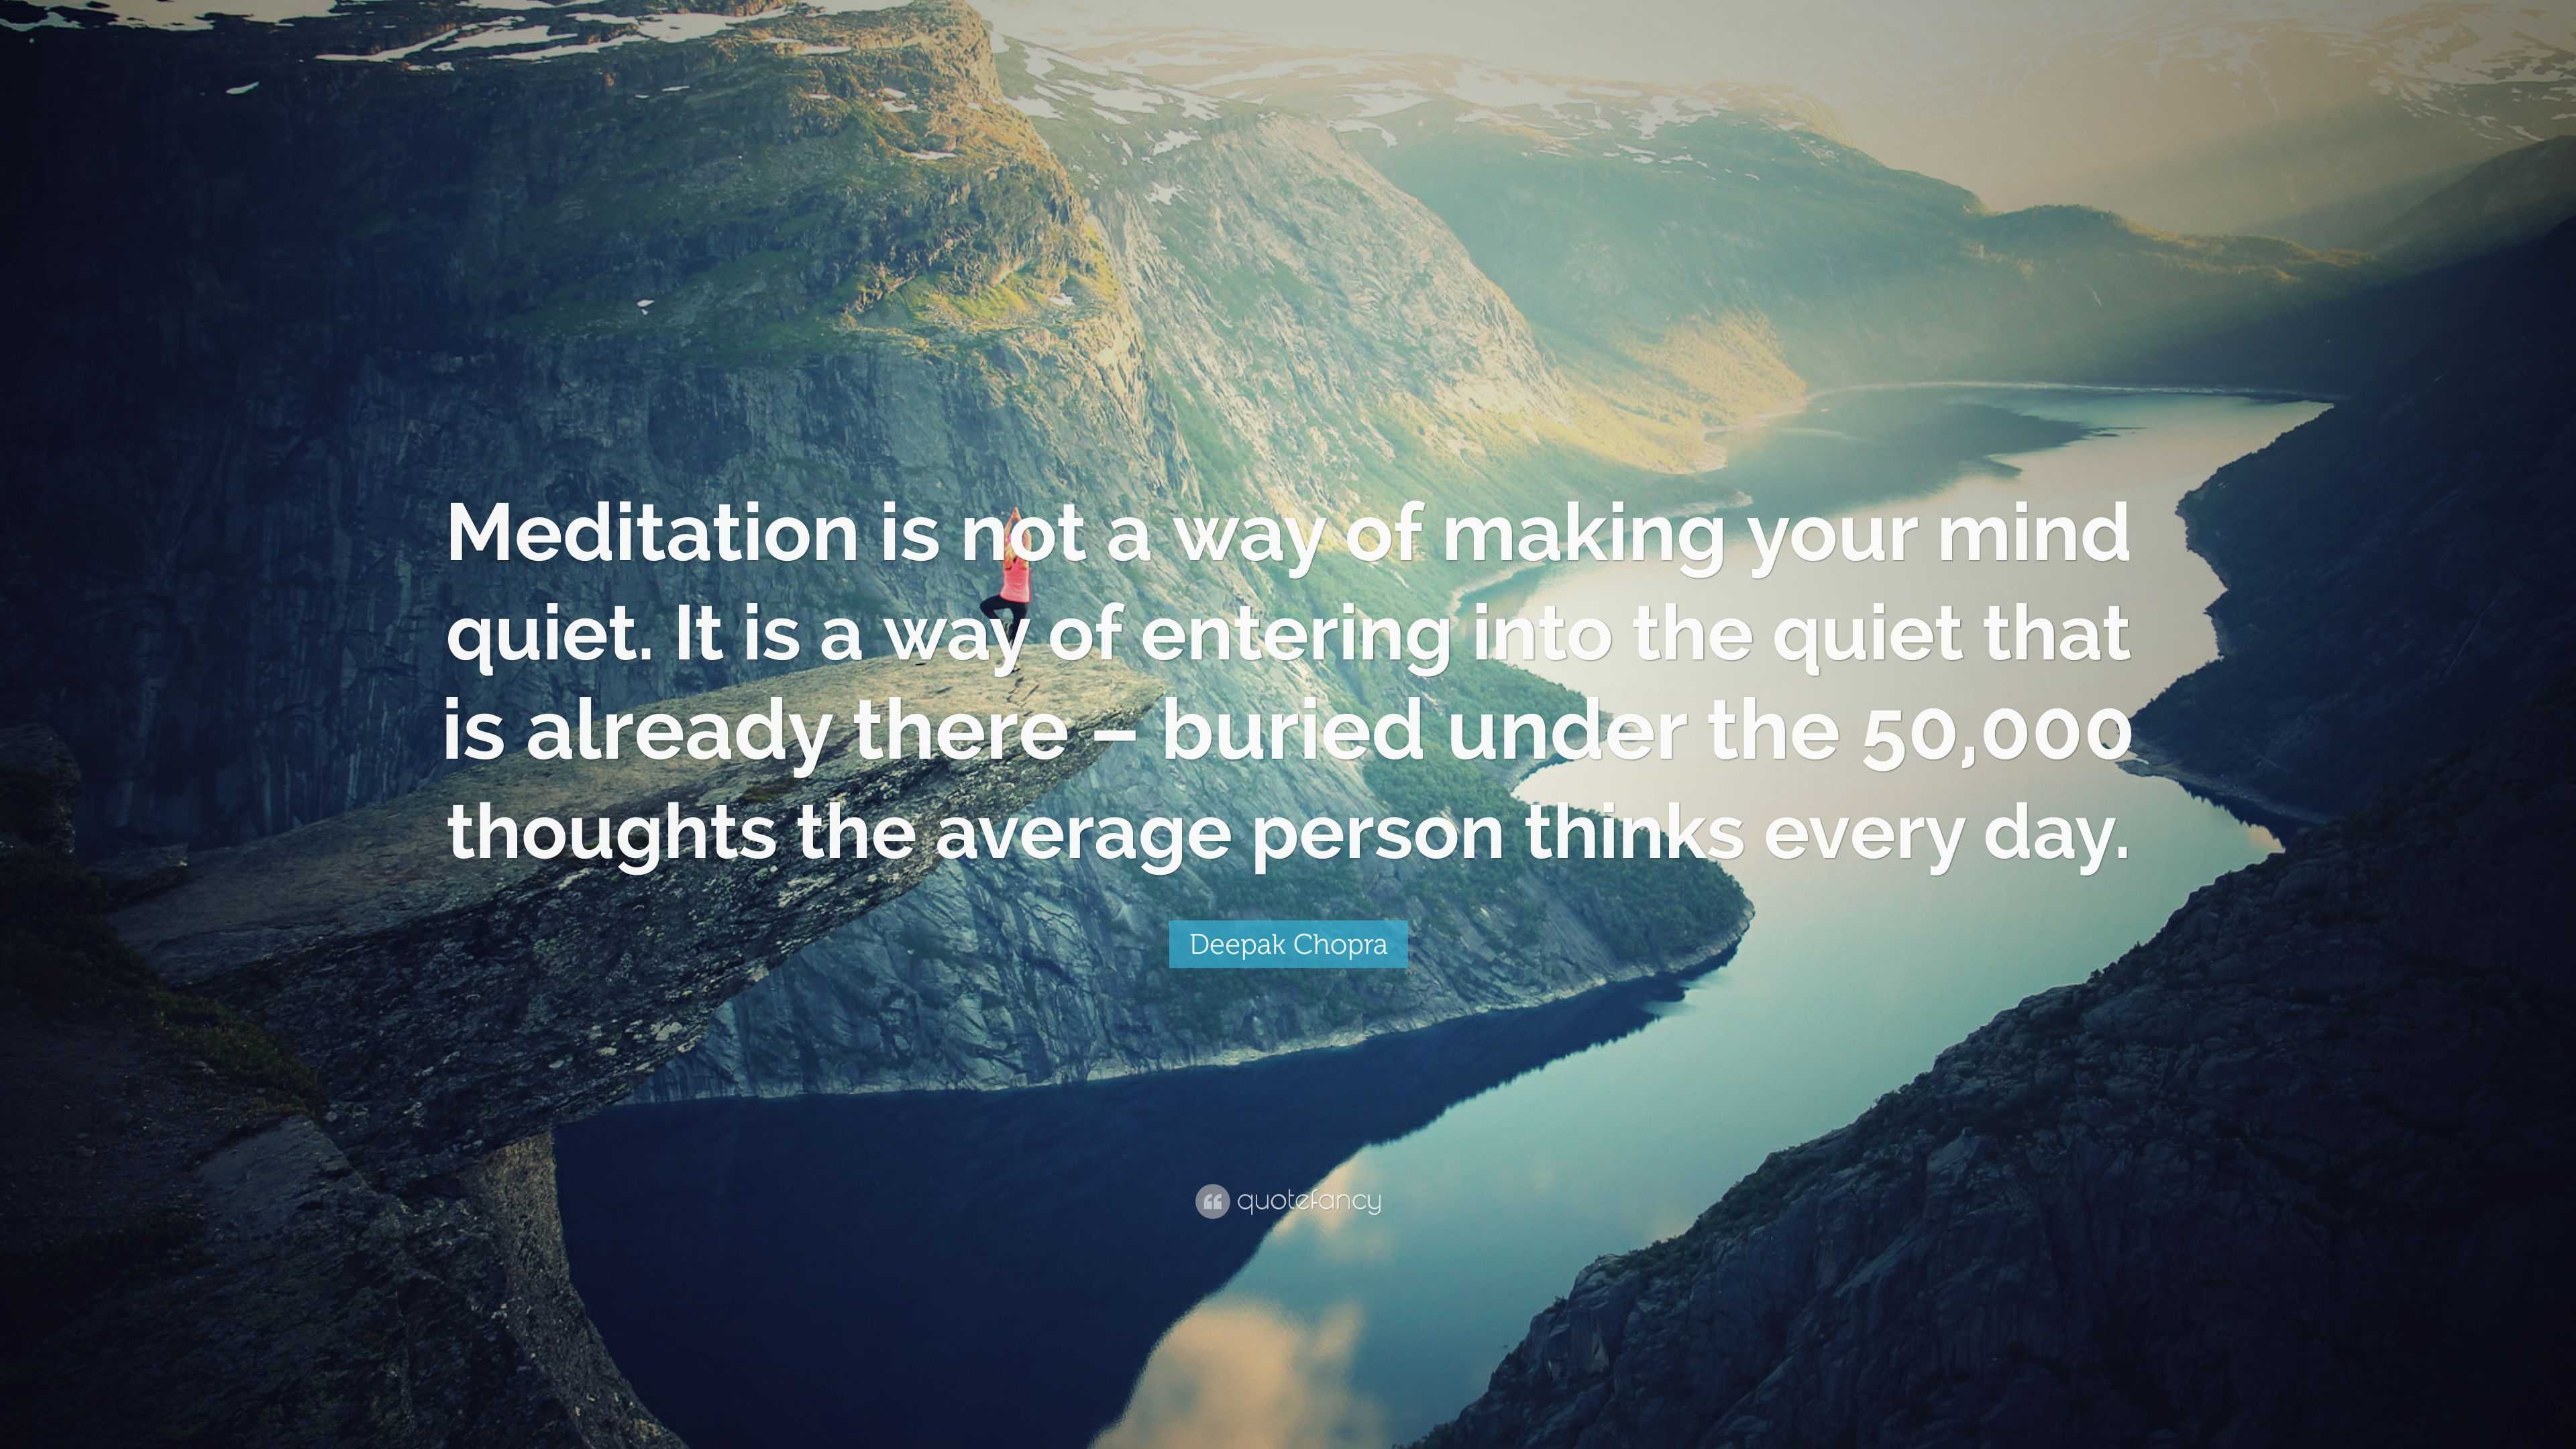 Deepak Chopra Quote: “Meditation is not a way of making your mind quiet